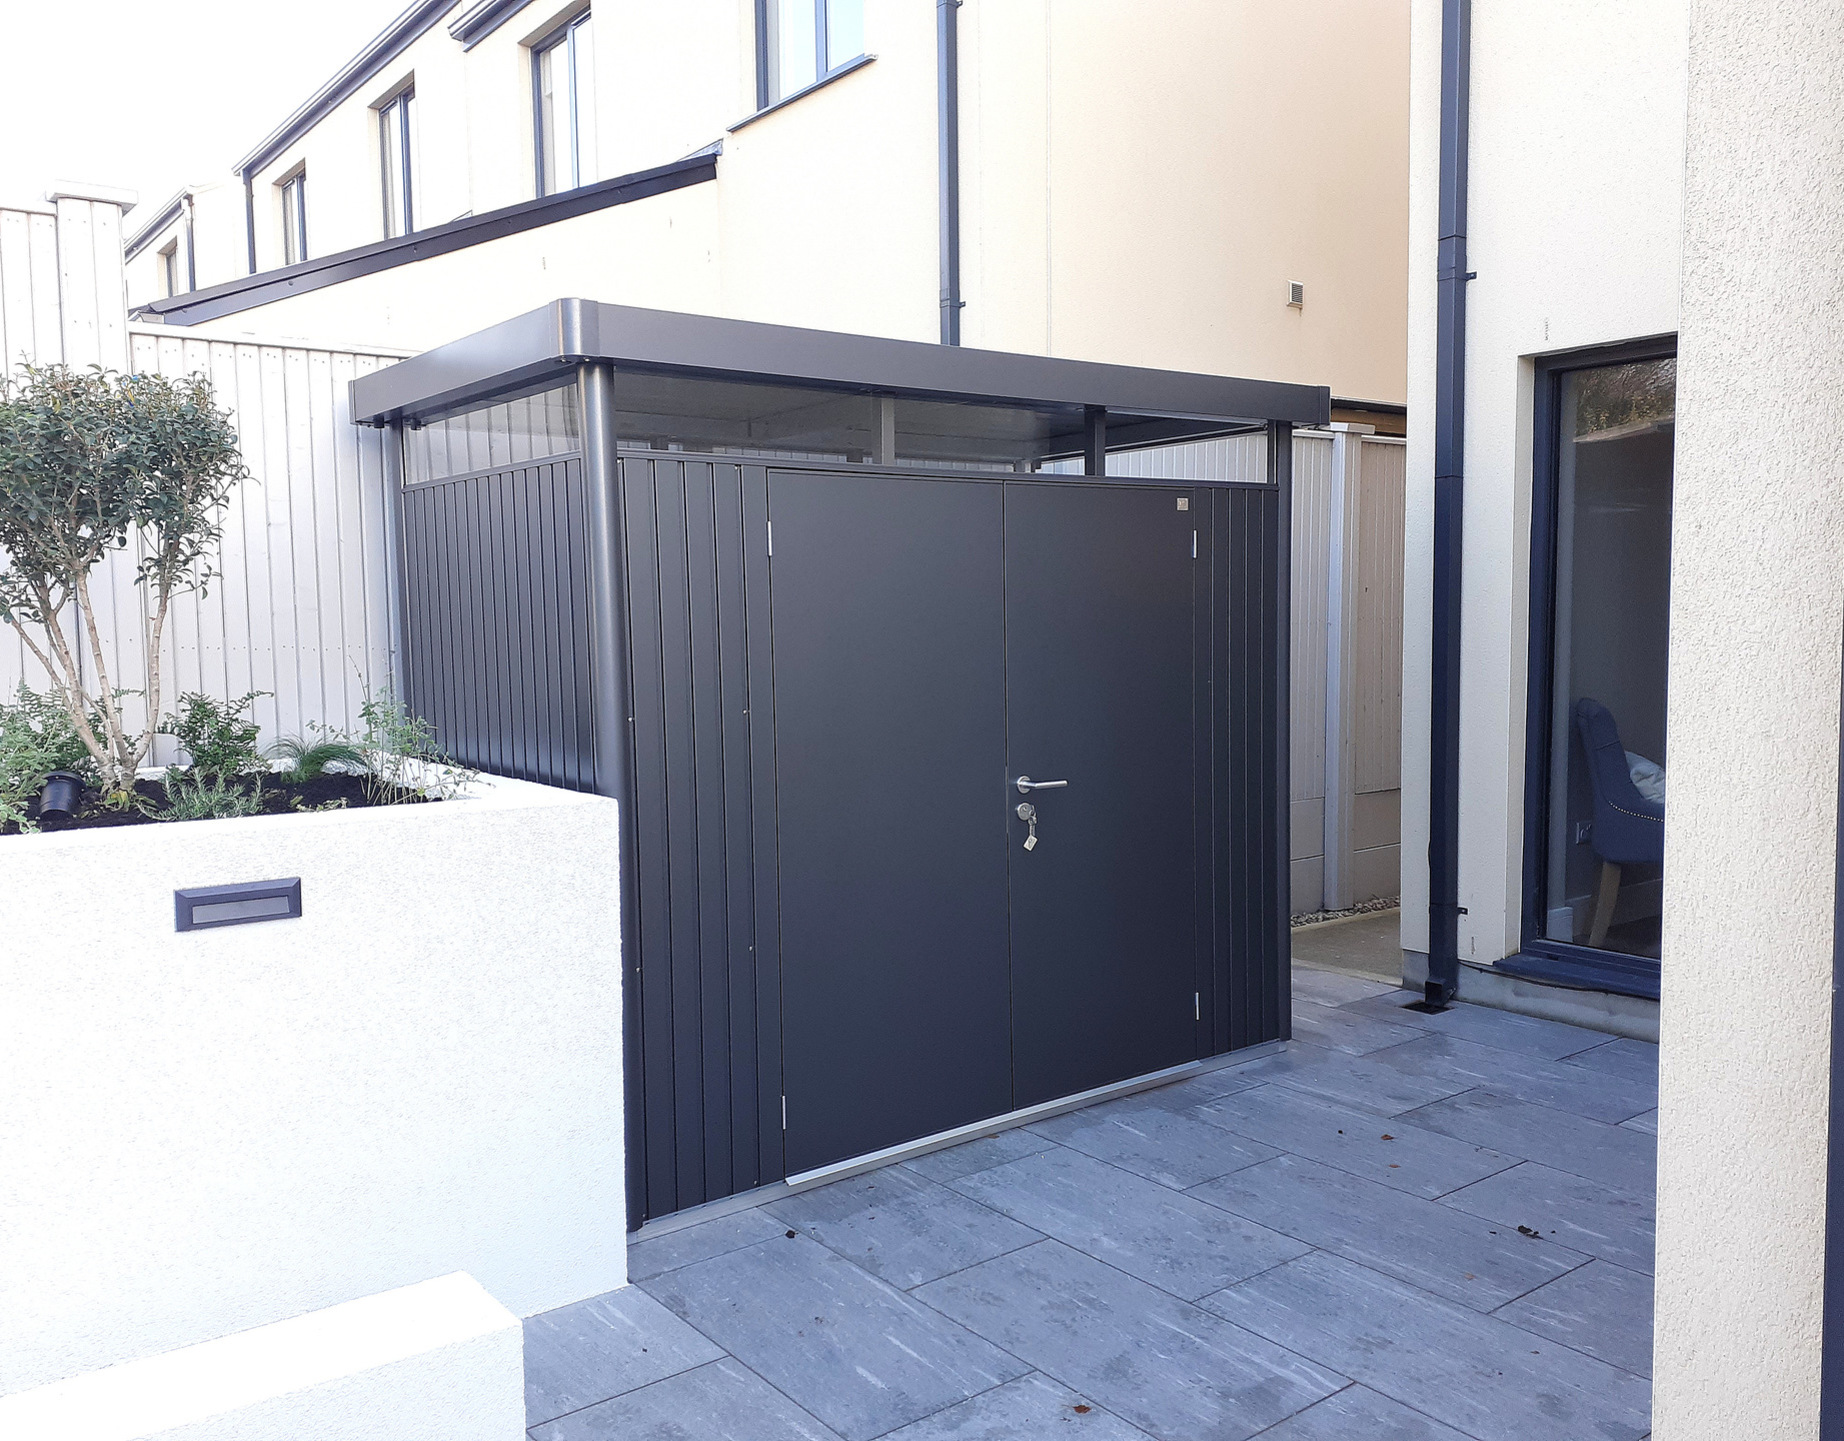 The Biohort HighLine H1 with optional accessories | Supplied + Fitted in Malahide, Co Dublin by Owen Chubb Garden Landscapers, Ireland's # 1 Biohort Garden Sheds Supplier & Installer.